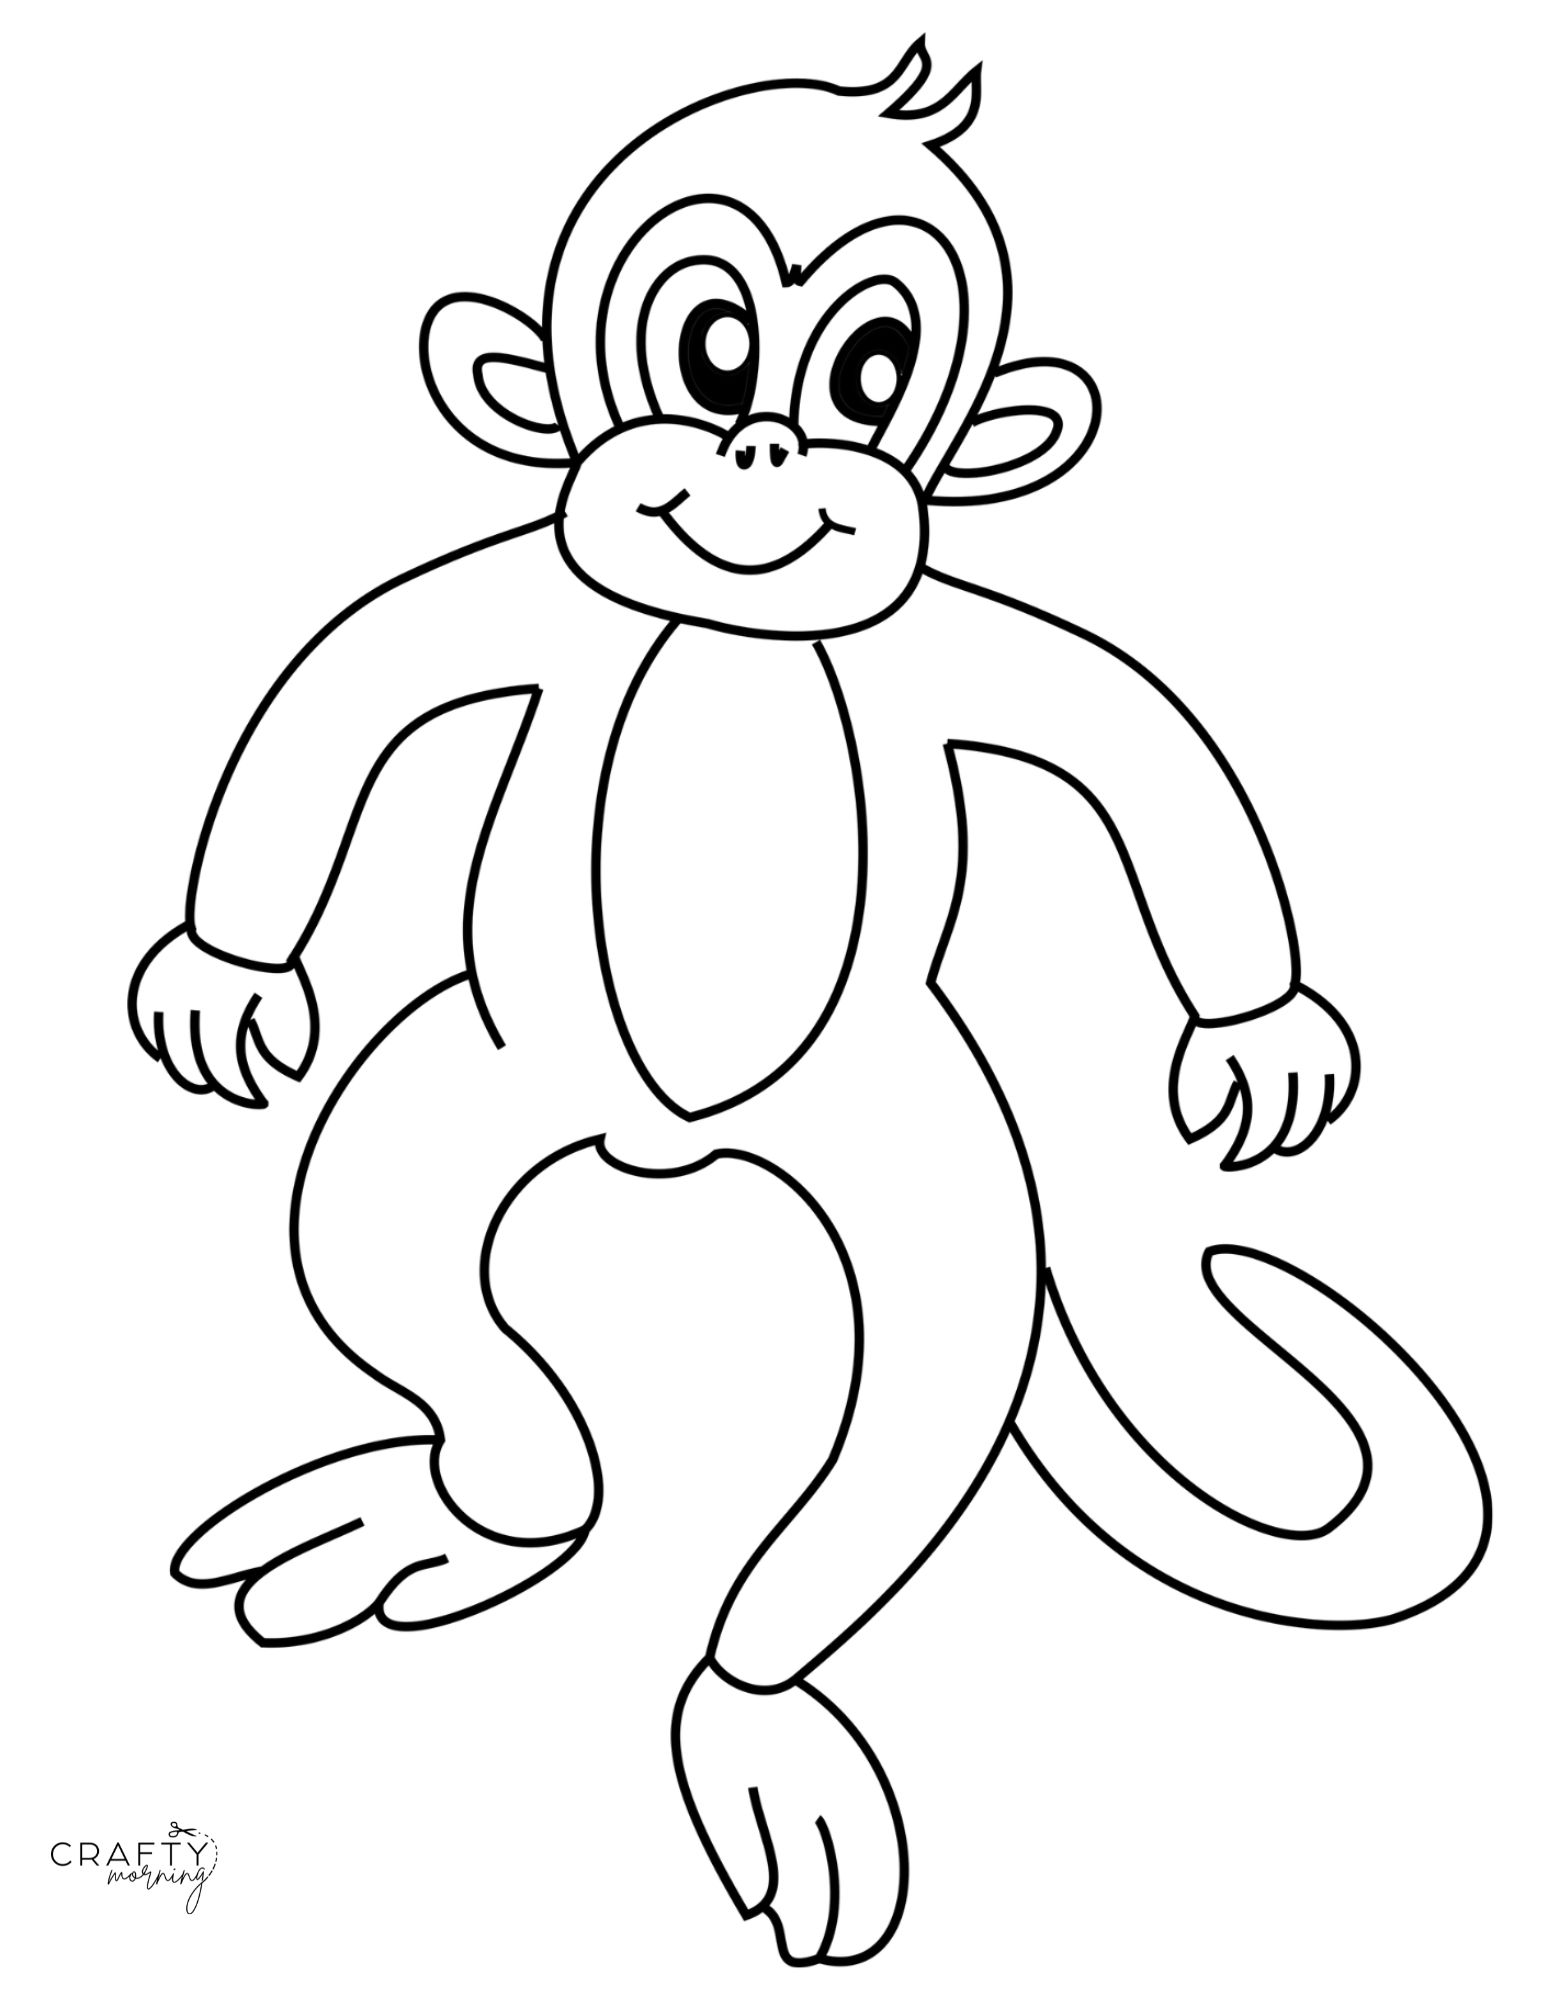 Monkey coloring to download for free - Monkeys Kids Coloring Pages